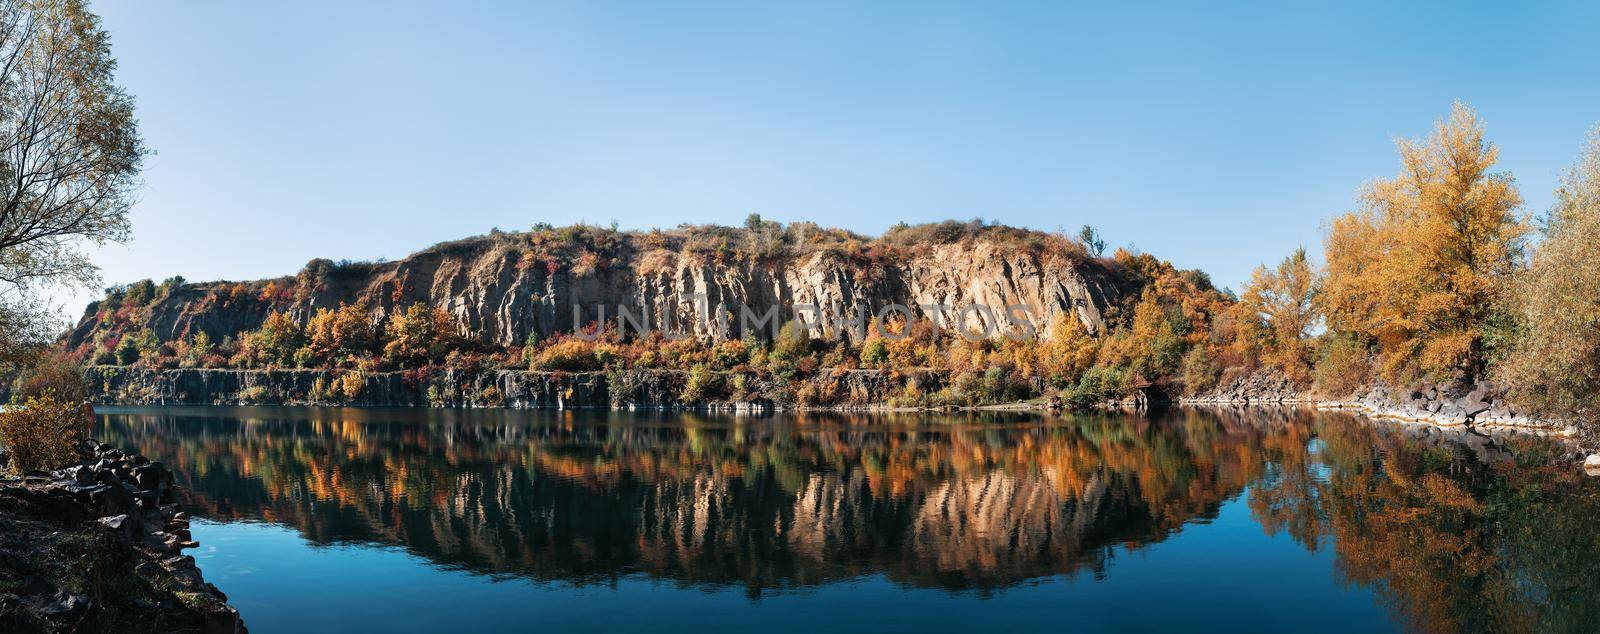 Old flooded quarry in autumn by palinchak